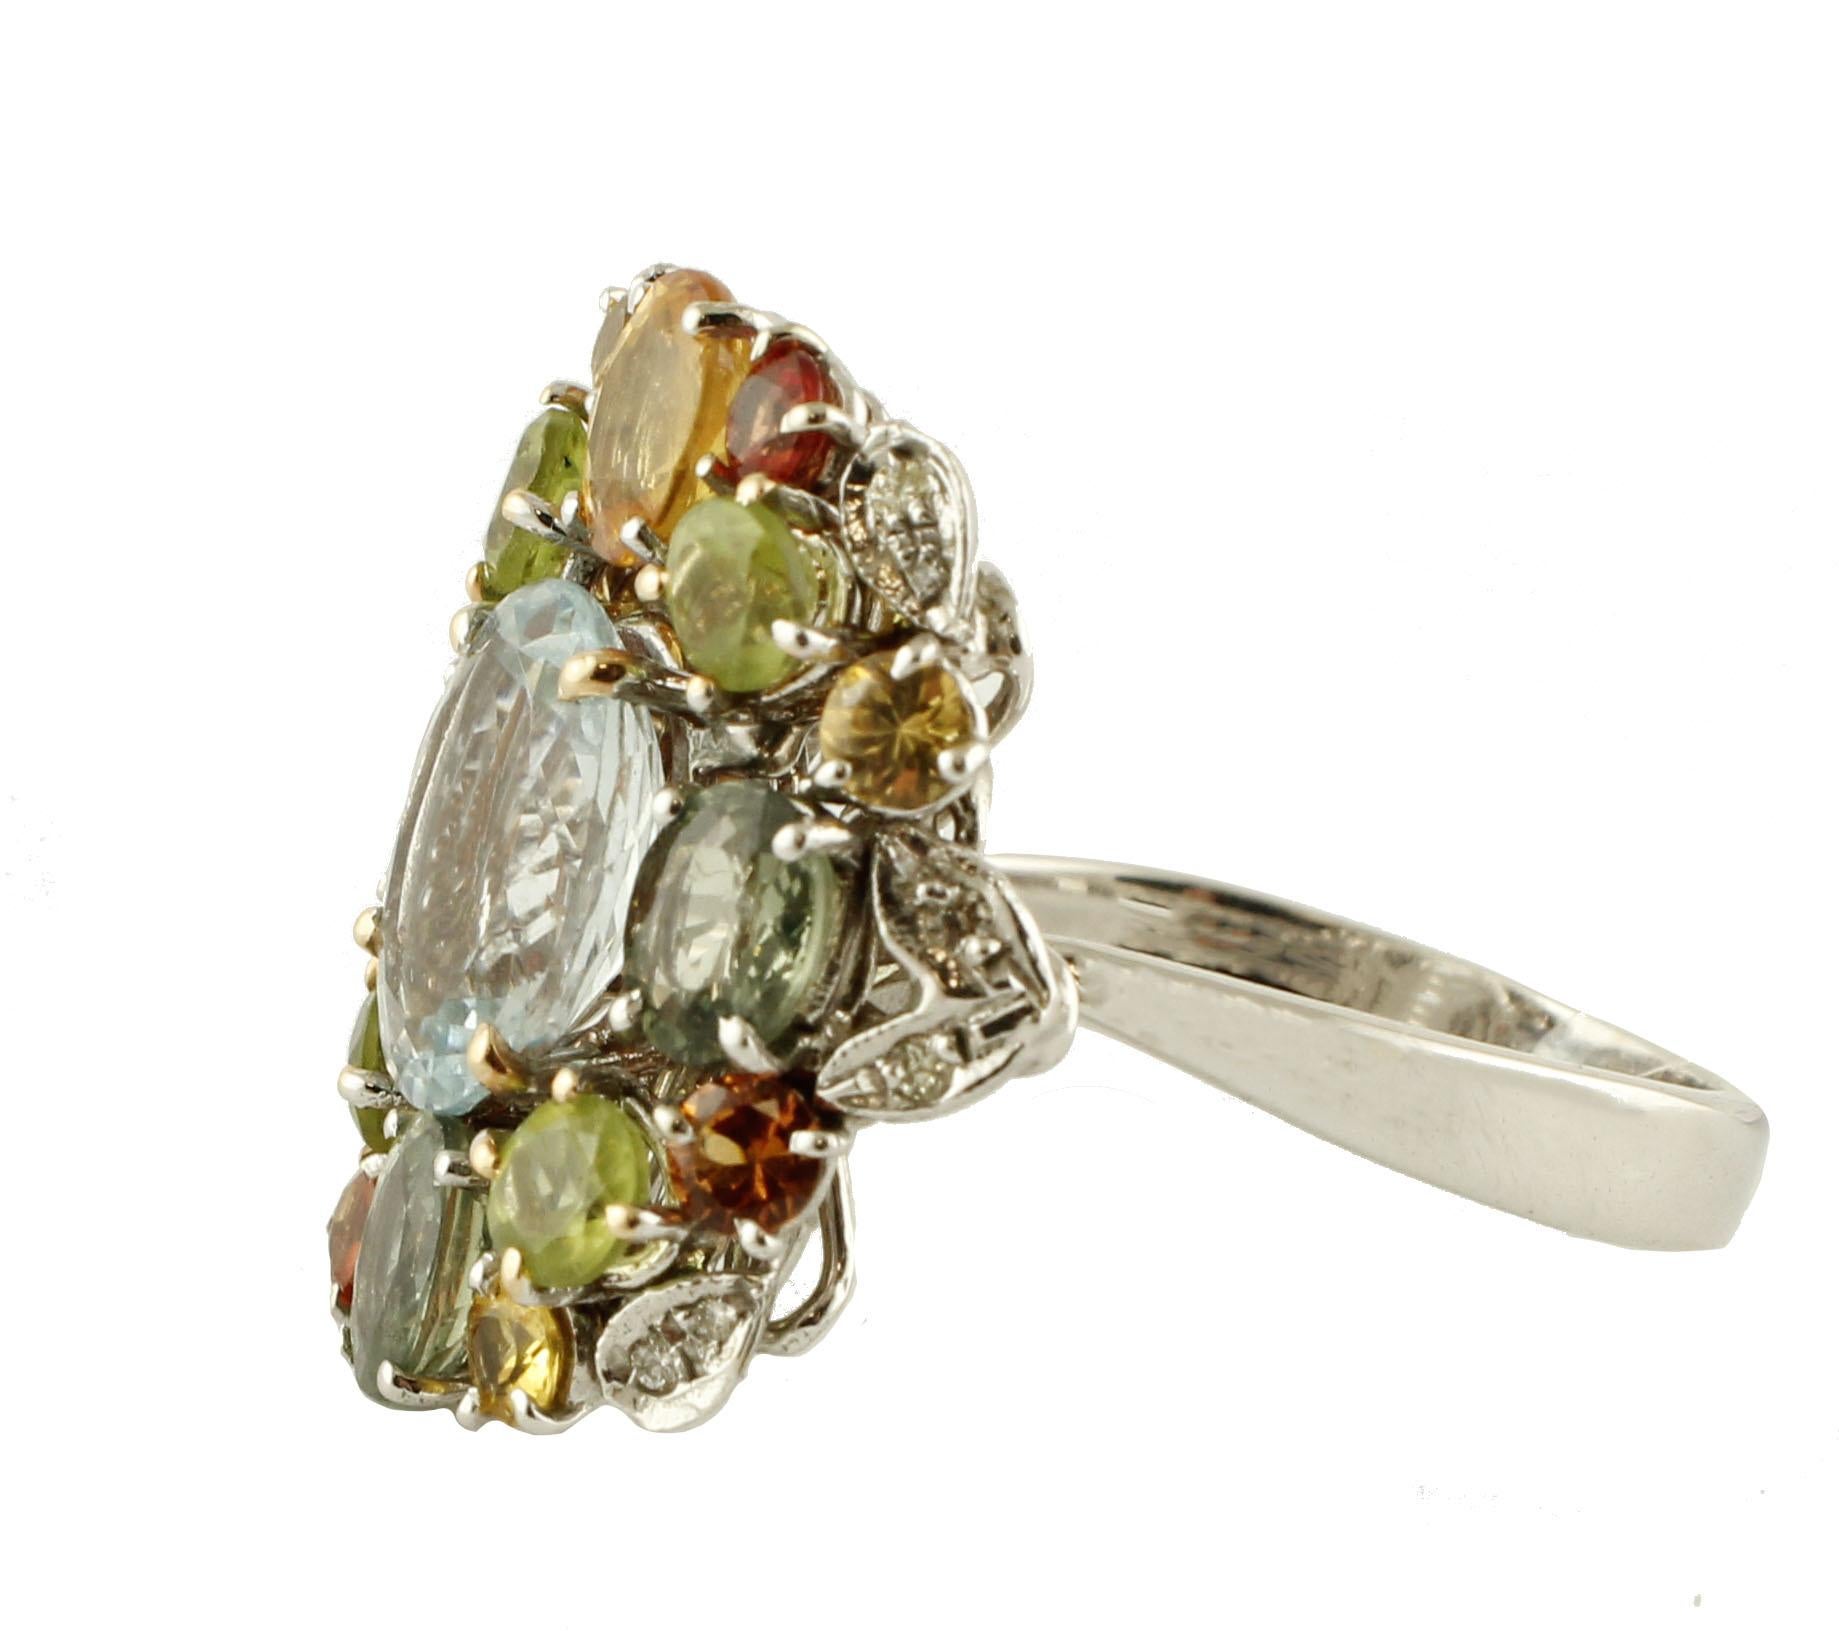 
Fabulous 14 kt white gold ring, embellished with 0.08 ct diamonds, fantastic colored sapphires, peridots and central aquamarine all of ct 6.17

Precious stones in color ct 6.17
Diamonds ct 0.08
Size ita. 16:50
Size franc. 56.50
Size USA. 7.75
Total